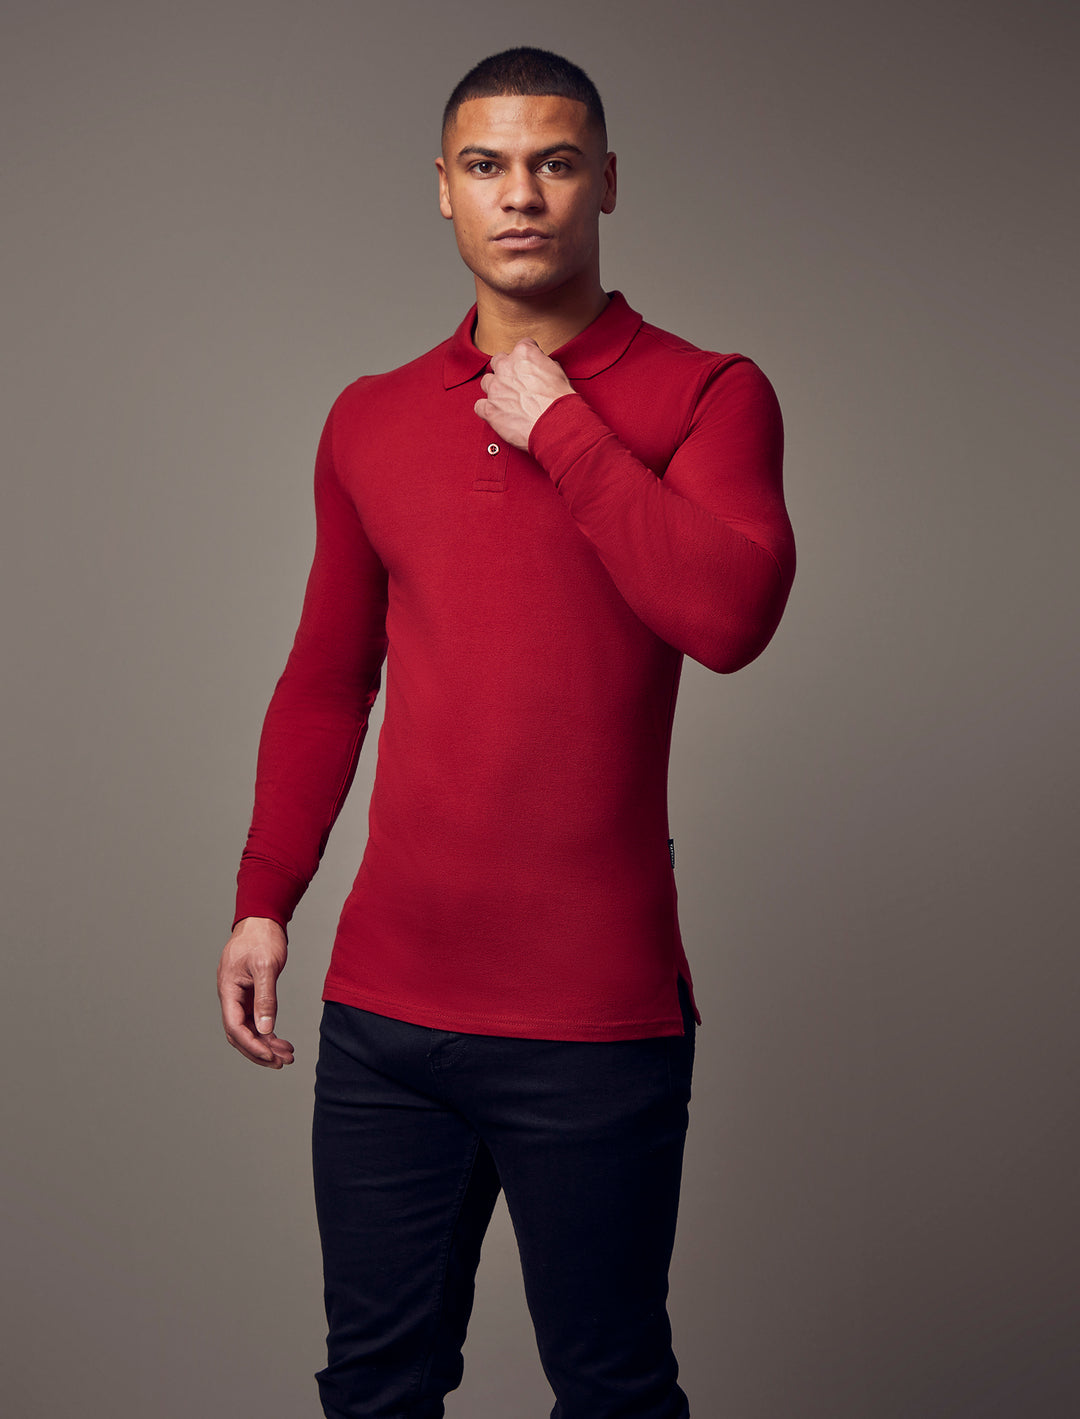 burgundy muscle fit long sleeve polo shirt, highlighting the tapered fit and premium quality offered by Tapered Menswear